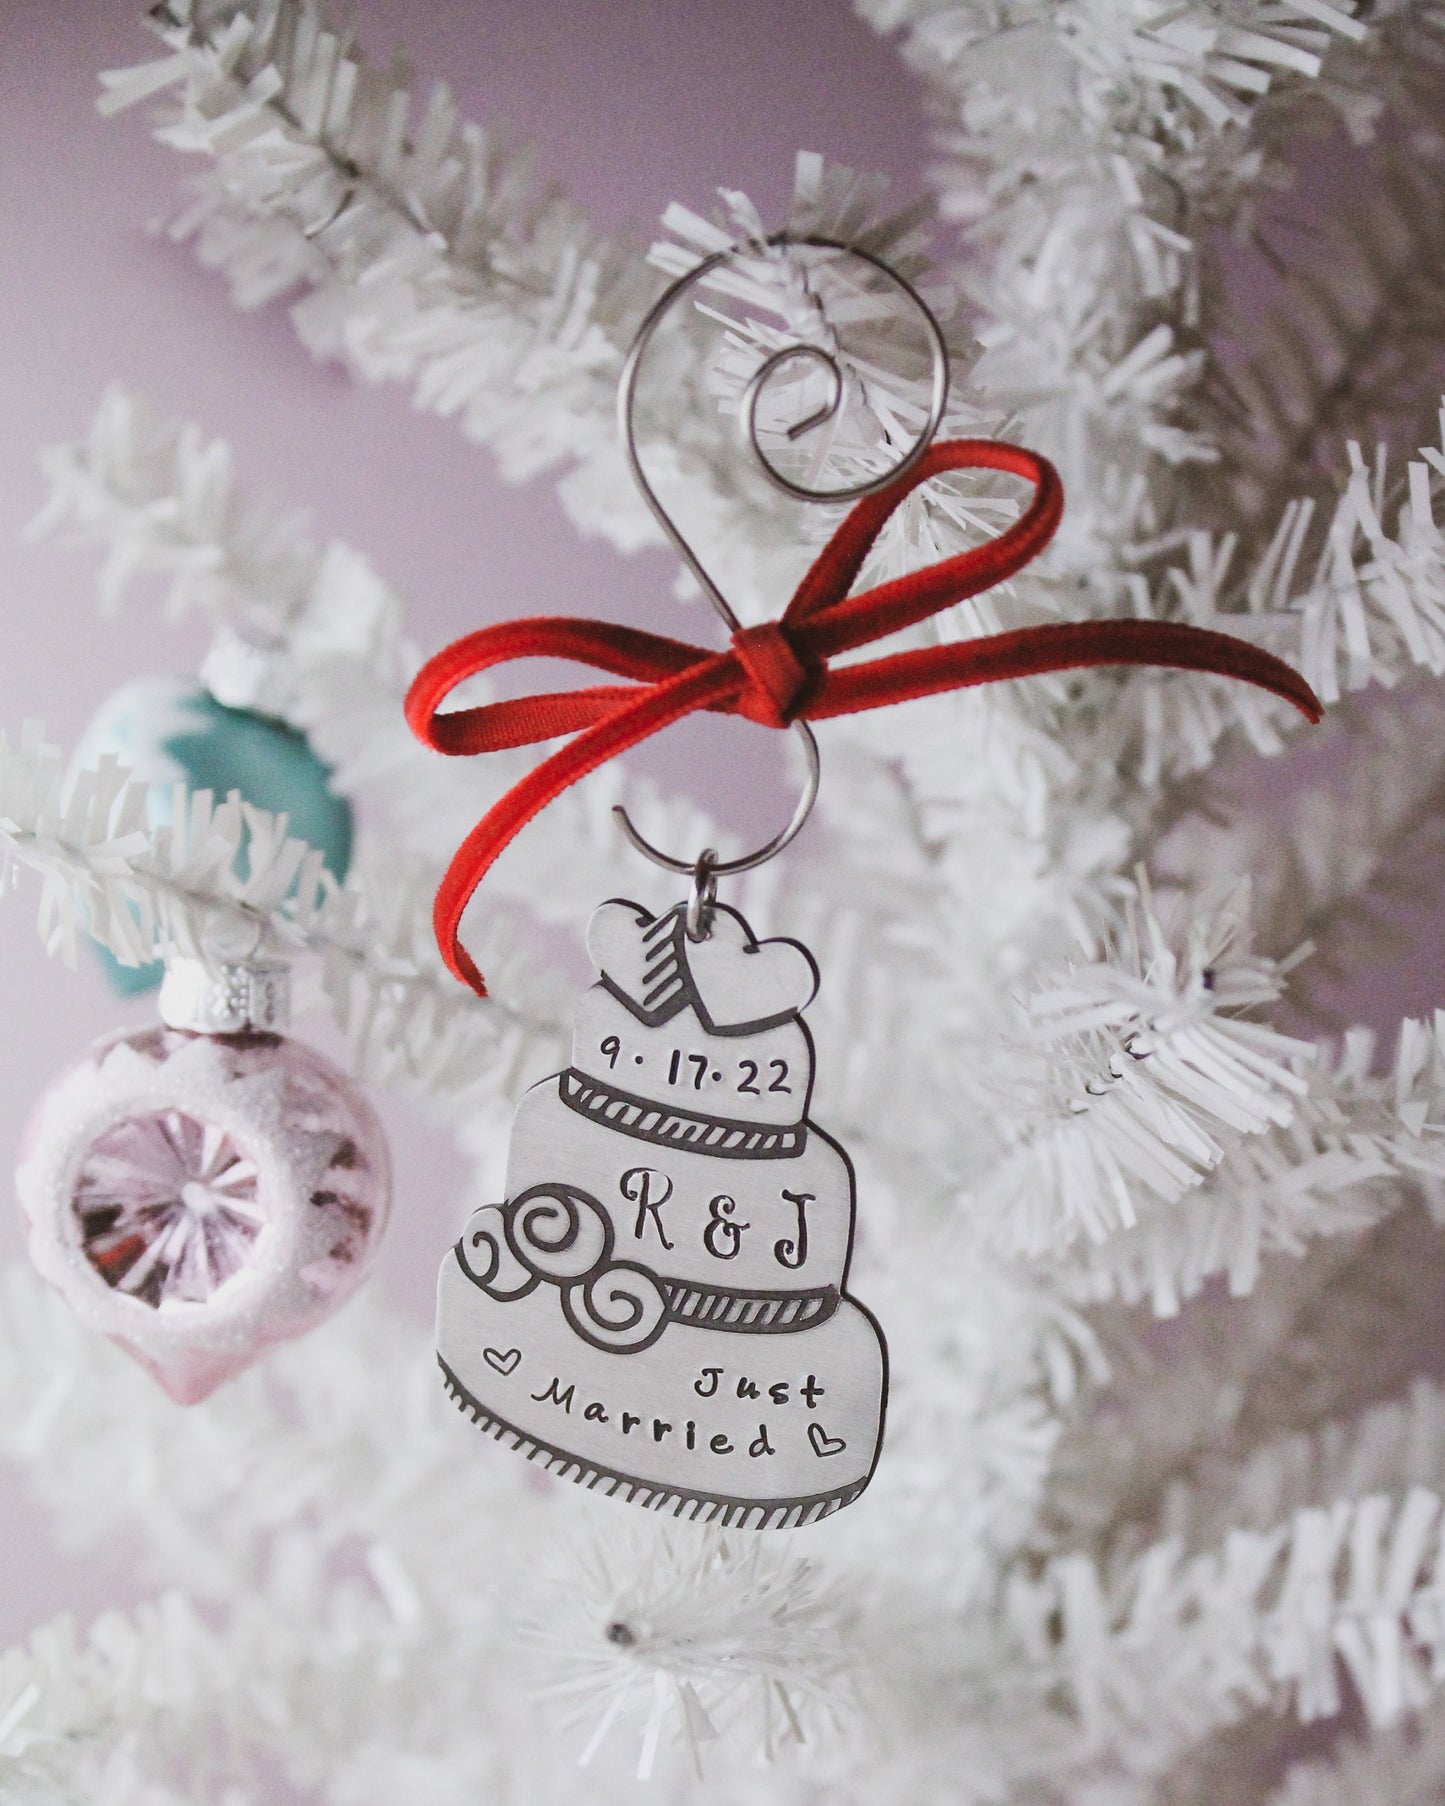 Wedding Cake Christmas Ornament, Just Married Ornament, First Christmas Gift, Christmas Wedding Ornament, Wedding Cake Ornament